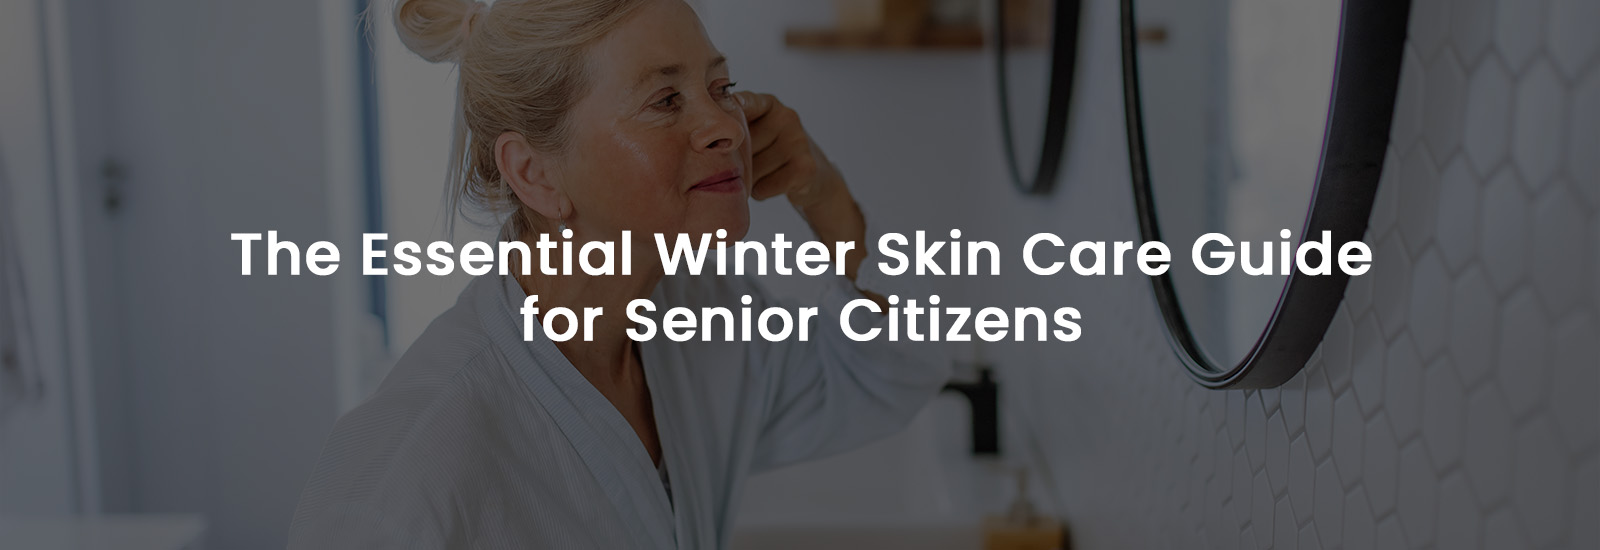 The Essential Winter Skin Care Guide for Senior Citizens | Banner Image